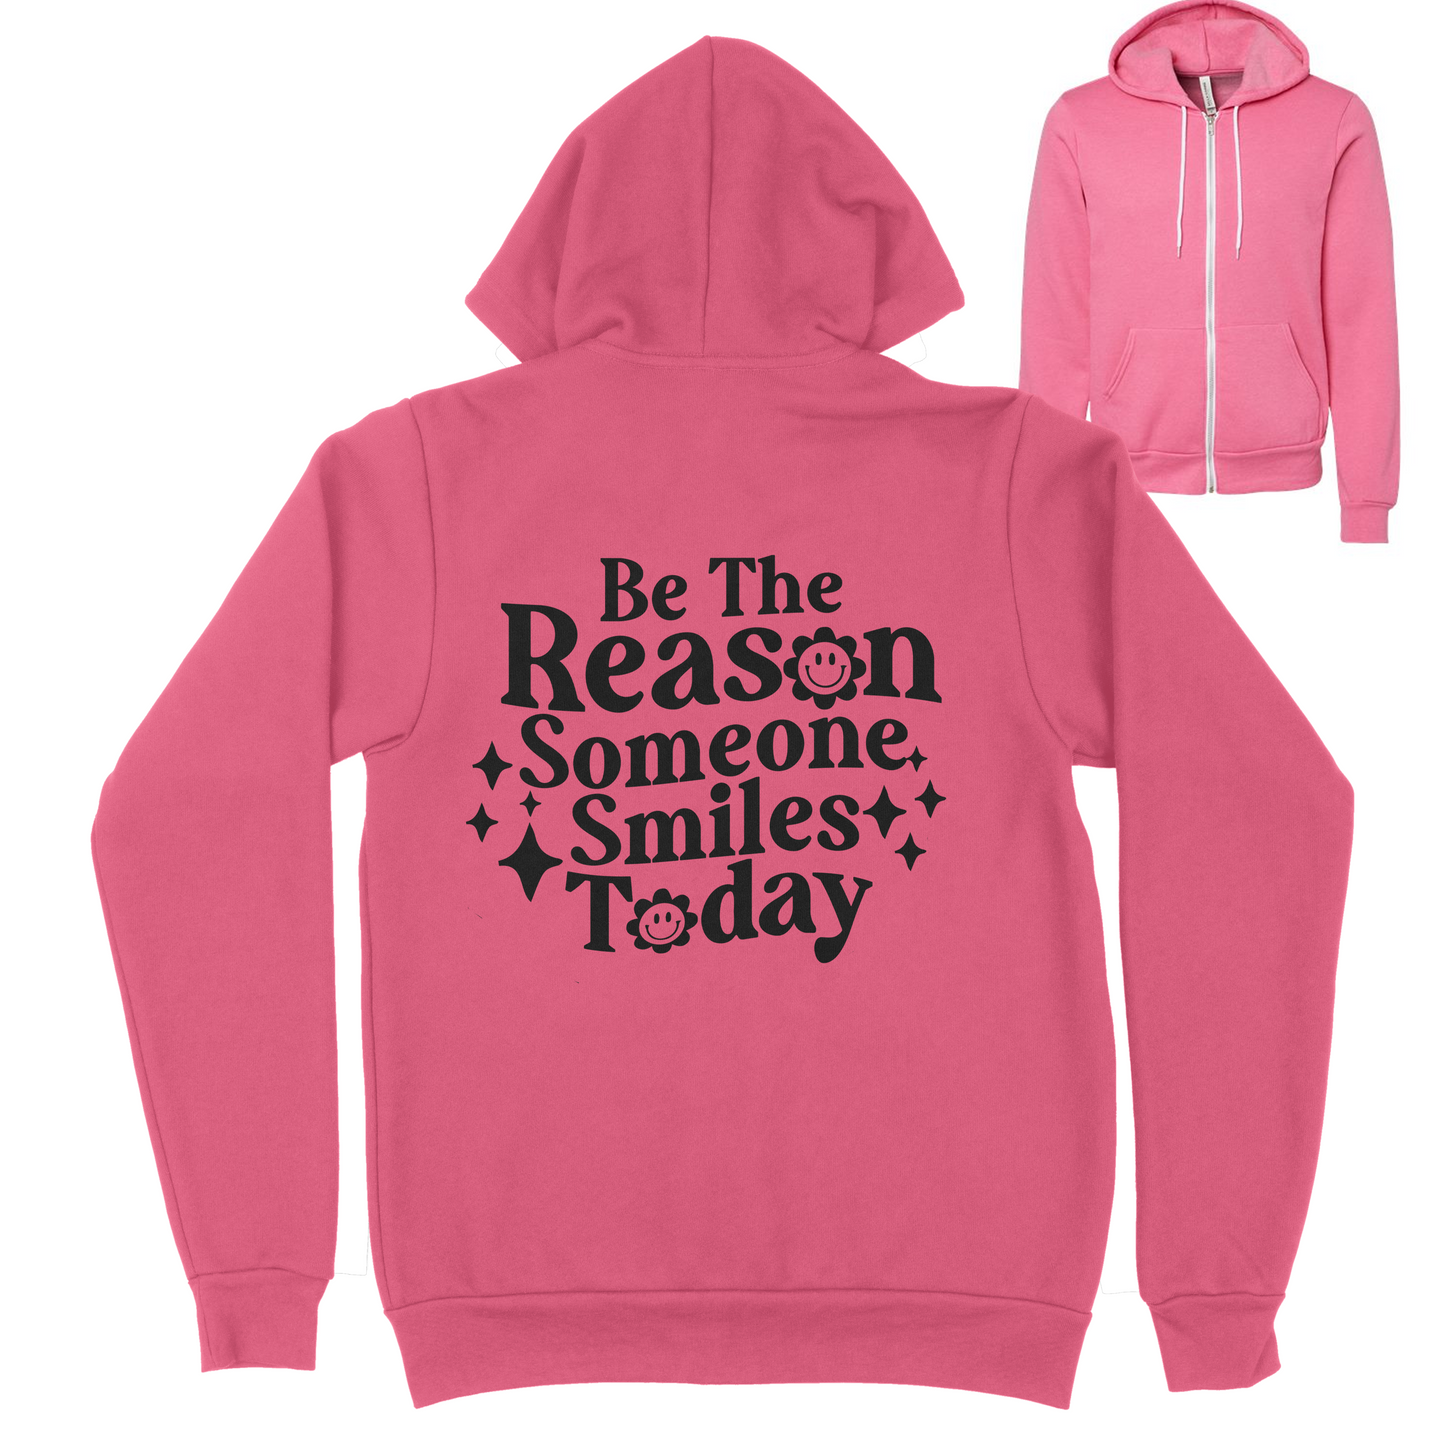 Be The Reason Someone Smiles Today Zip Up Hoodie